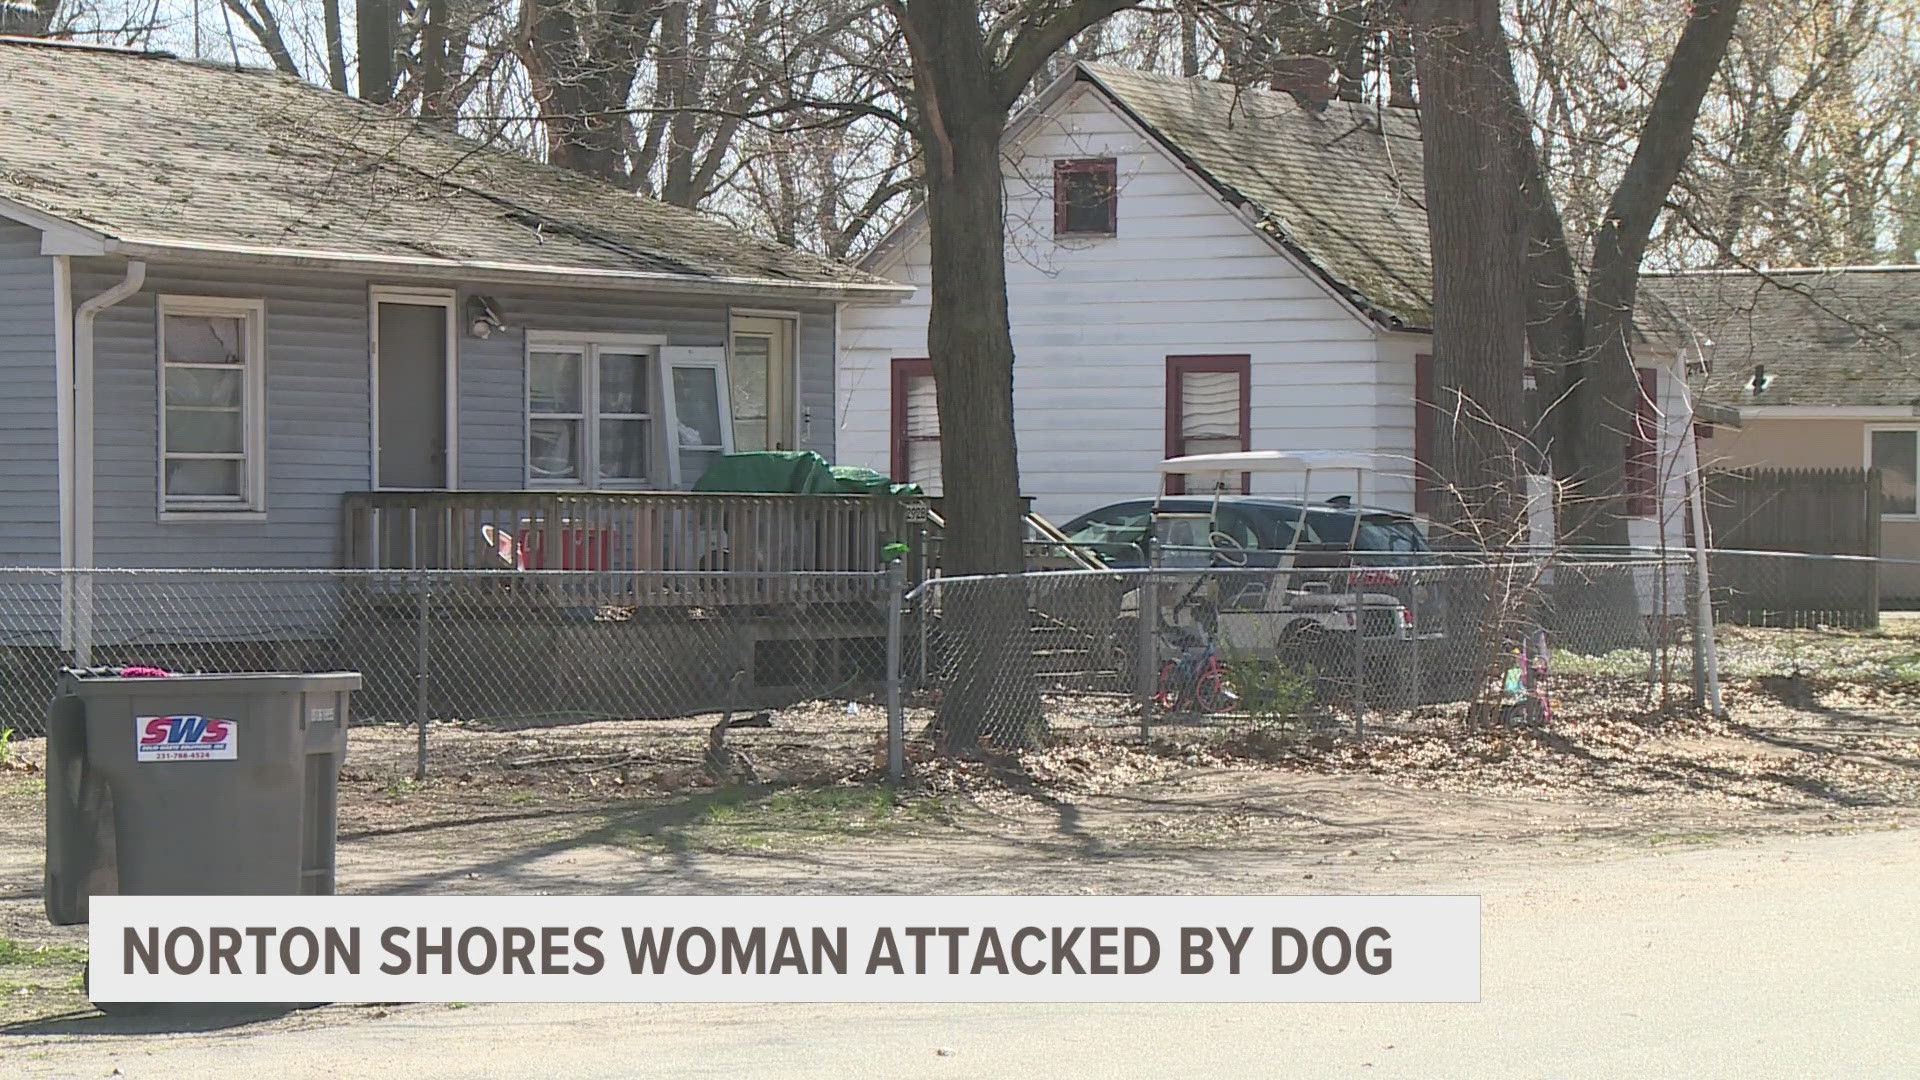 The woman was attacked Monday morning by a dog her son brought home.